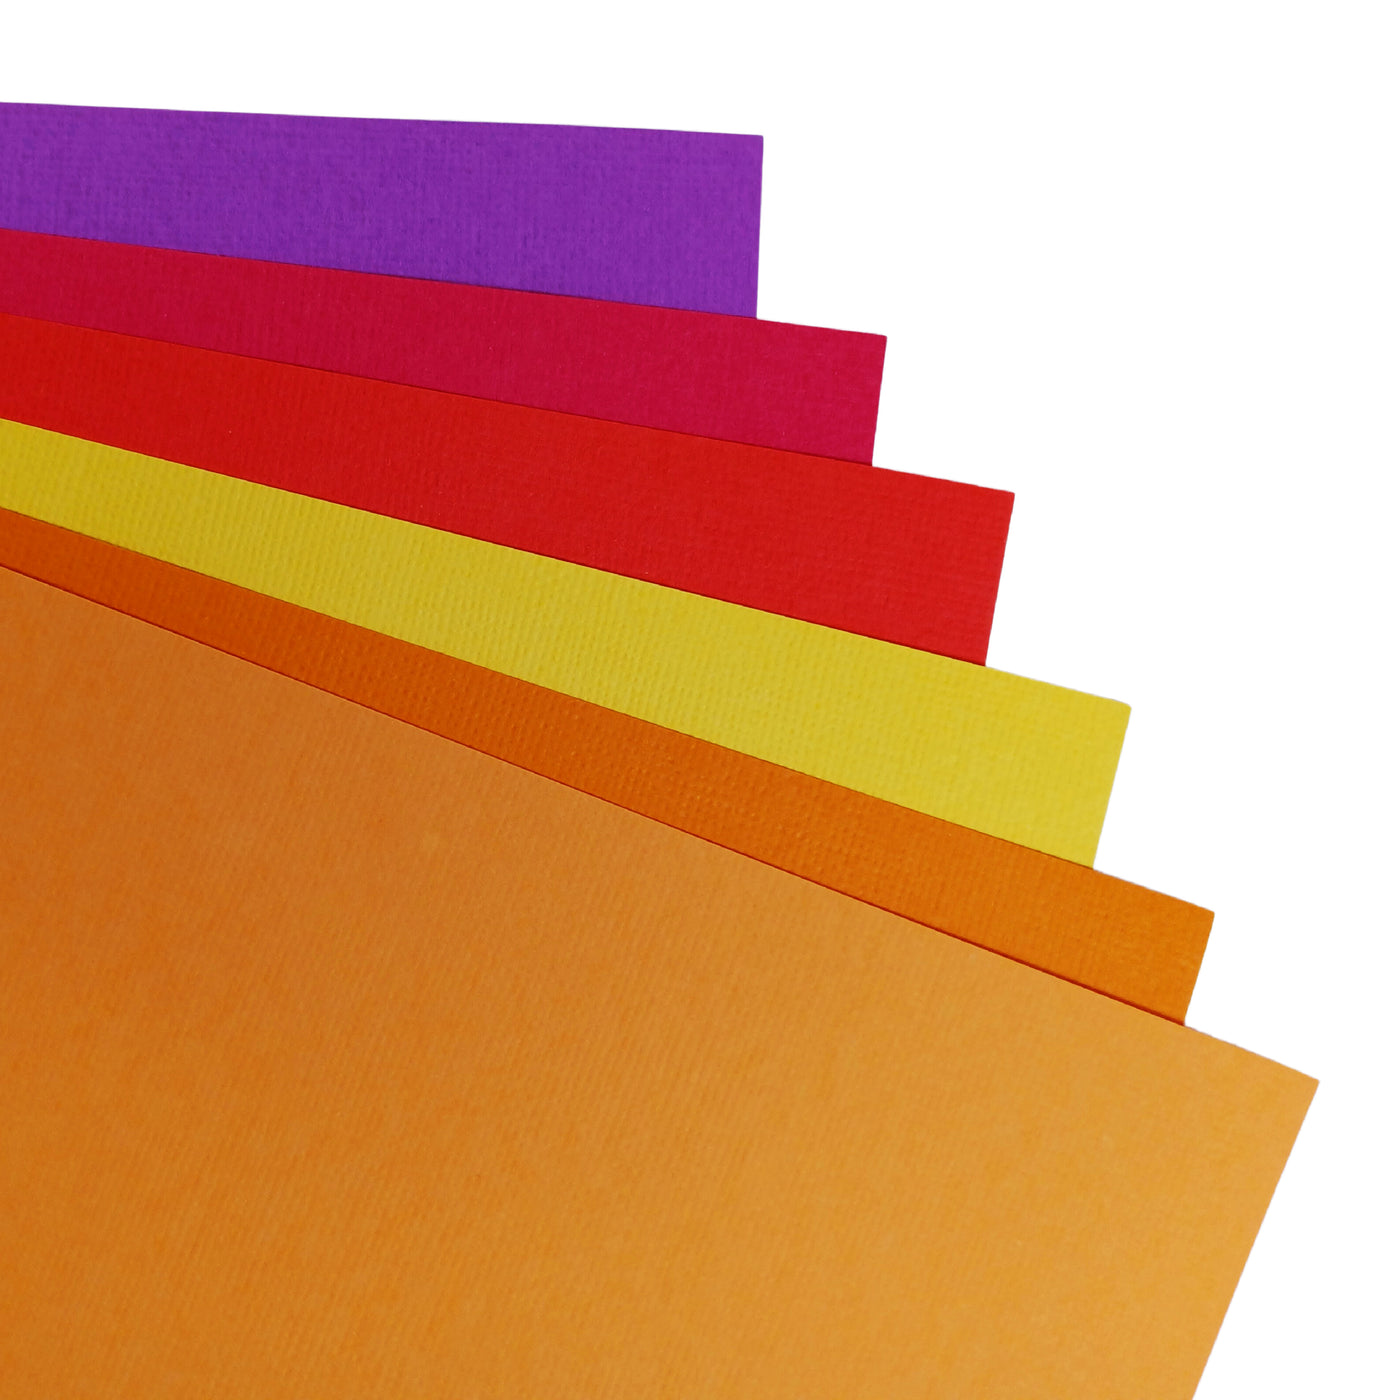 Hot Summer variety includes two (2) each of six (6) fun, and bright colors of American Crafts textured cardstock.